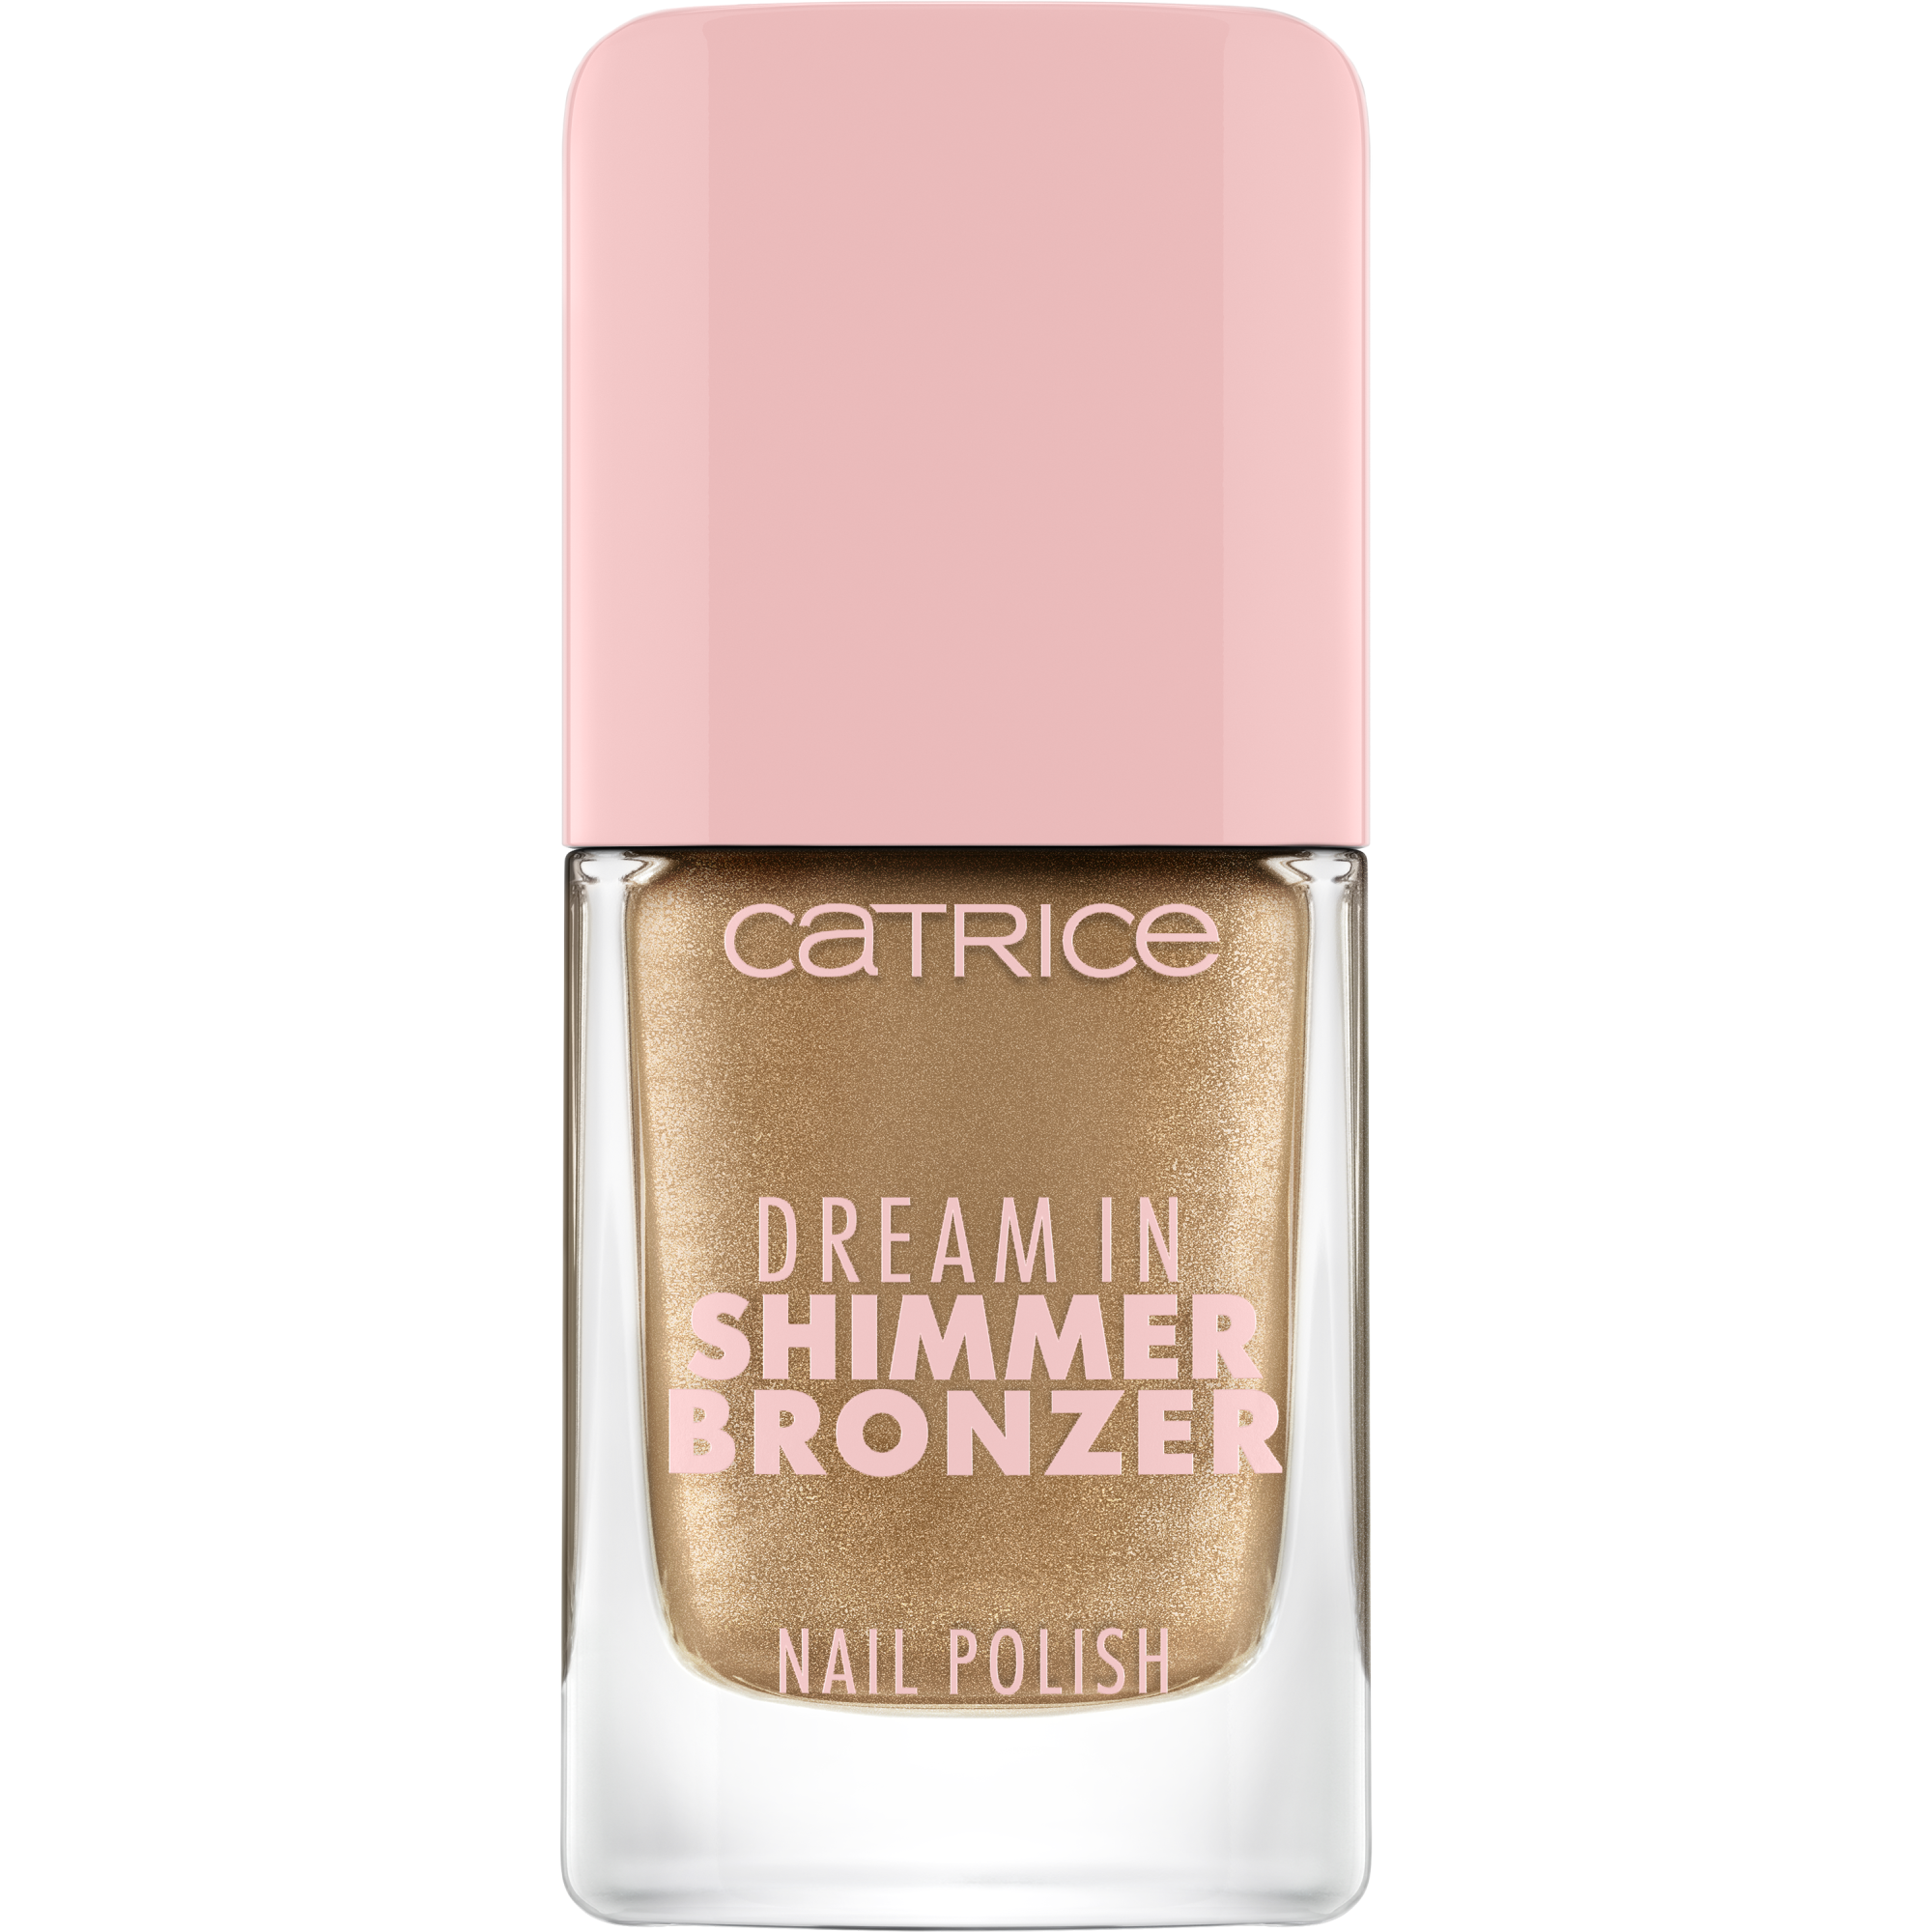 Dream In Shimmer Bronzer Nail Polish vernis à ongles